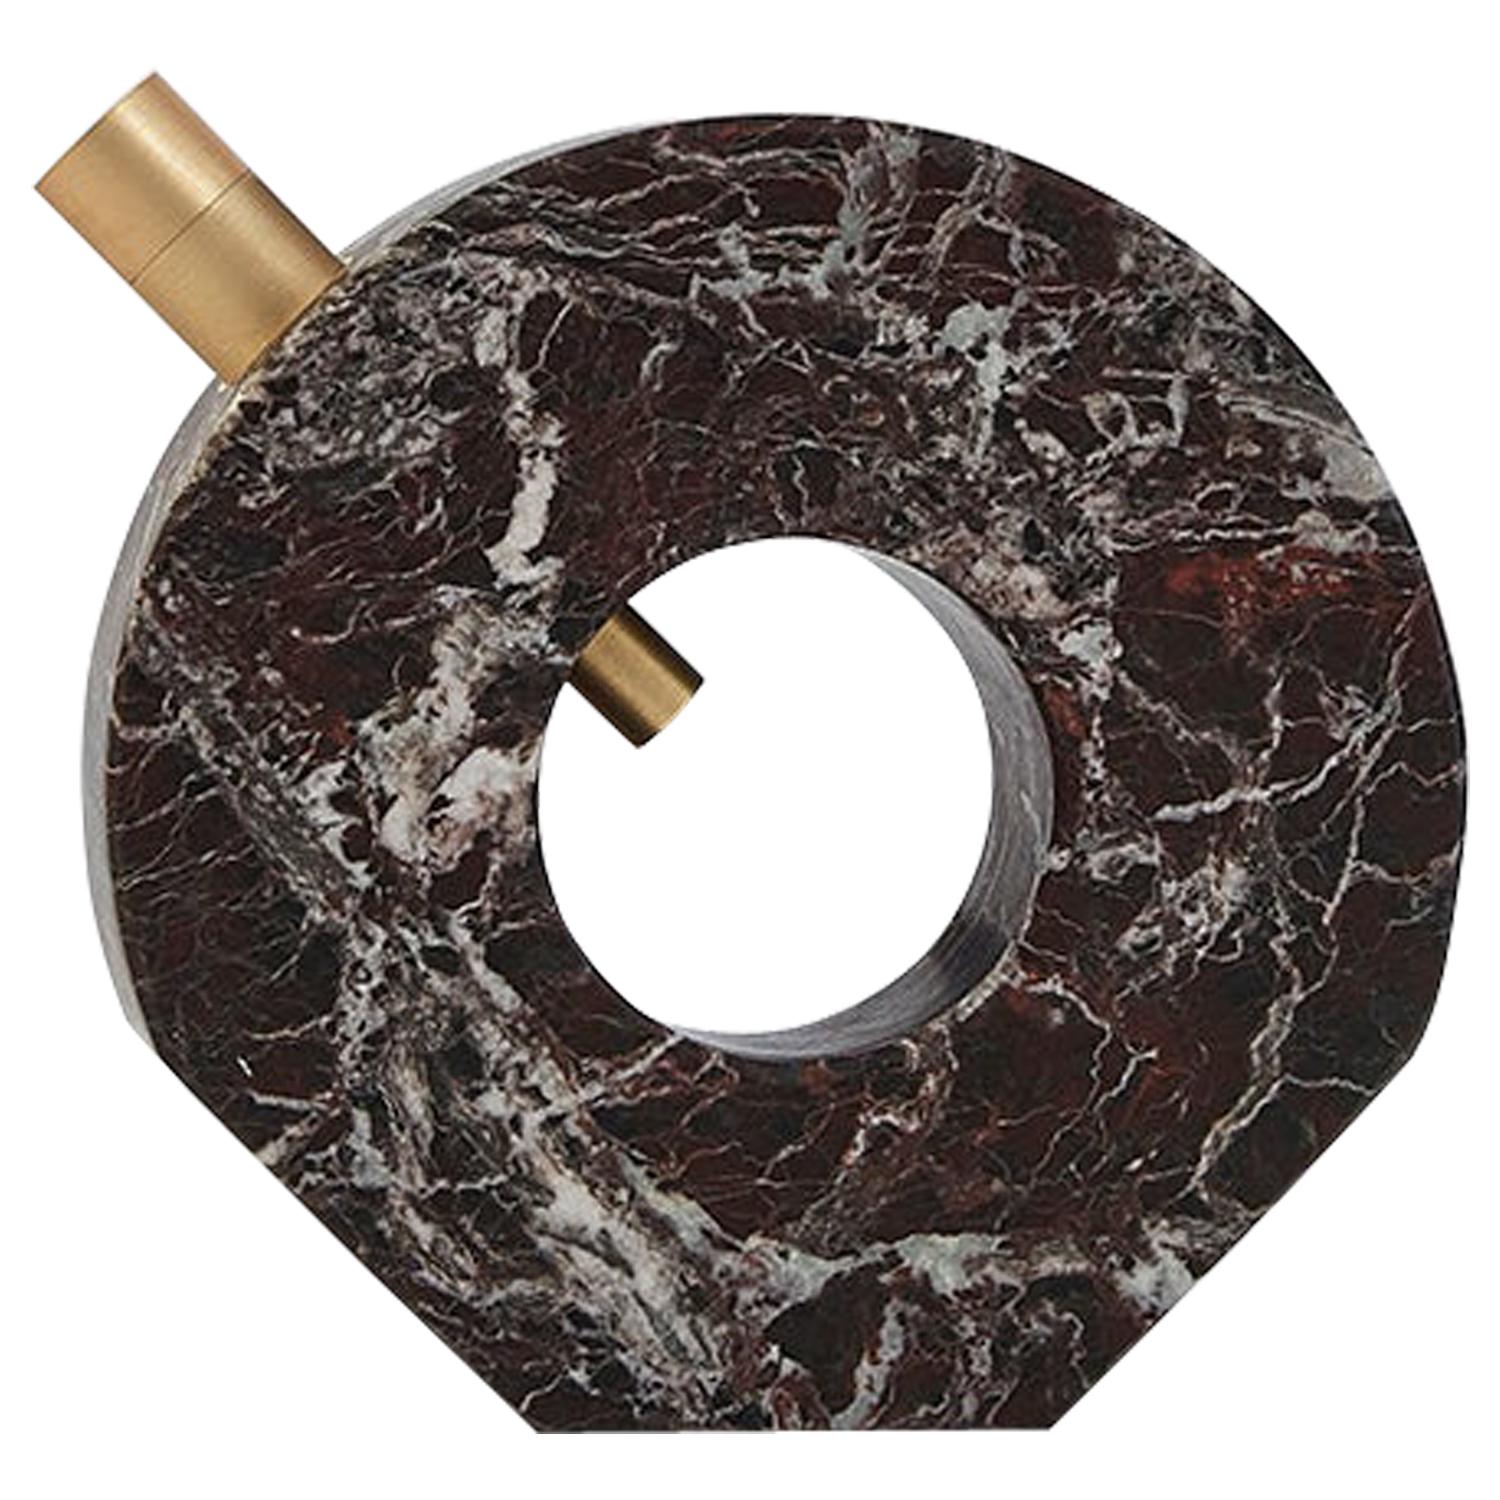 Voyager Disk Rosso Levanto Marble and Brass Table Lamp